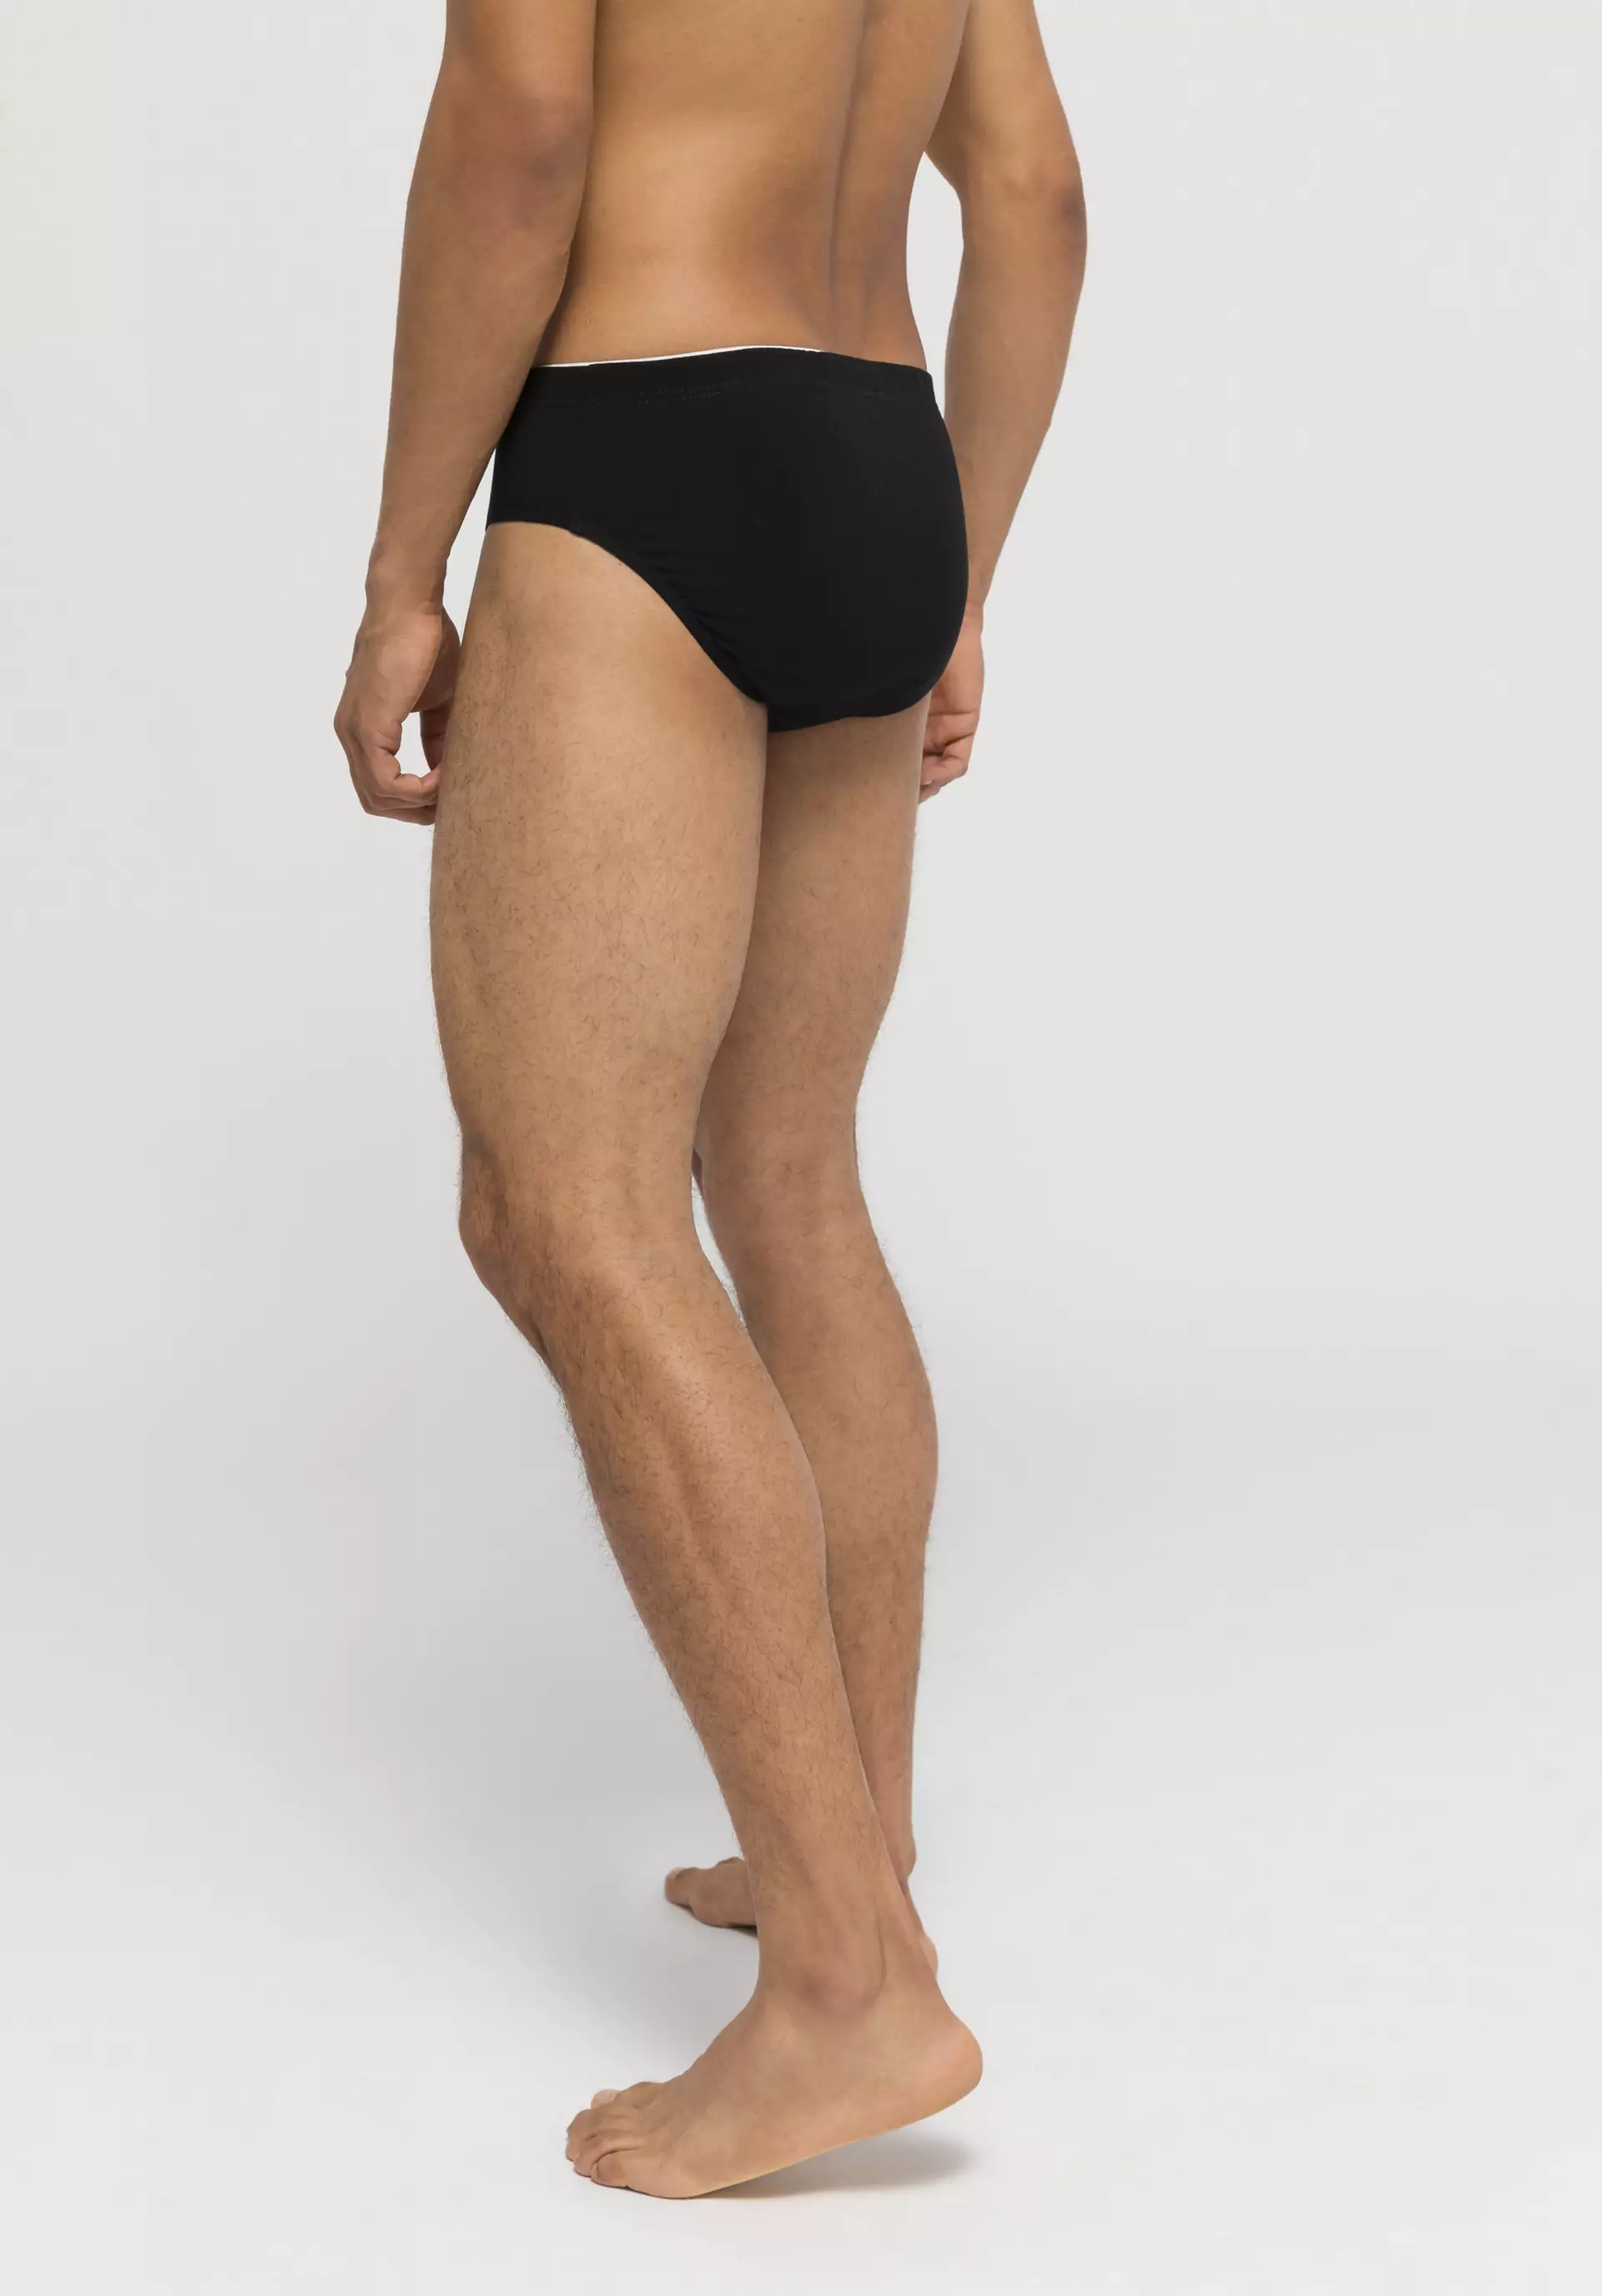 PureLUX briefs in a set of 2 made of organic cotton - 1